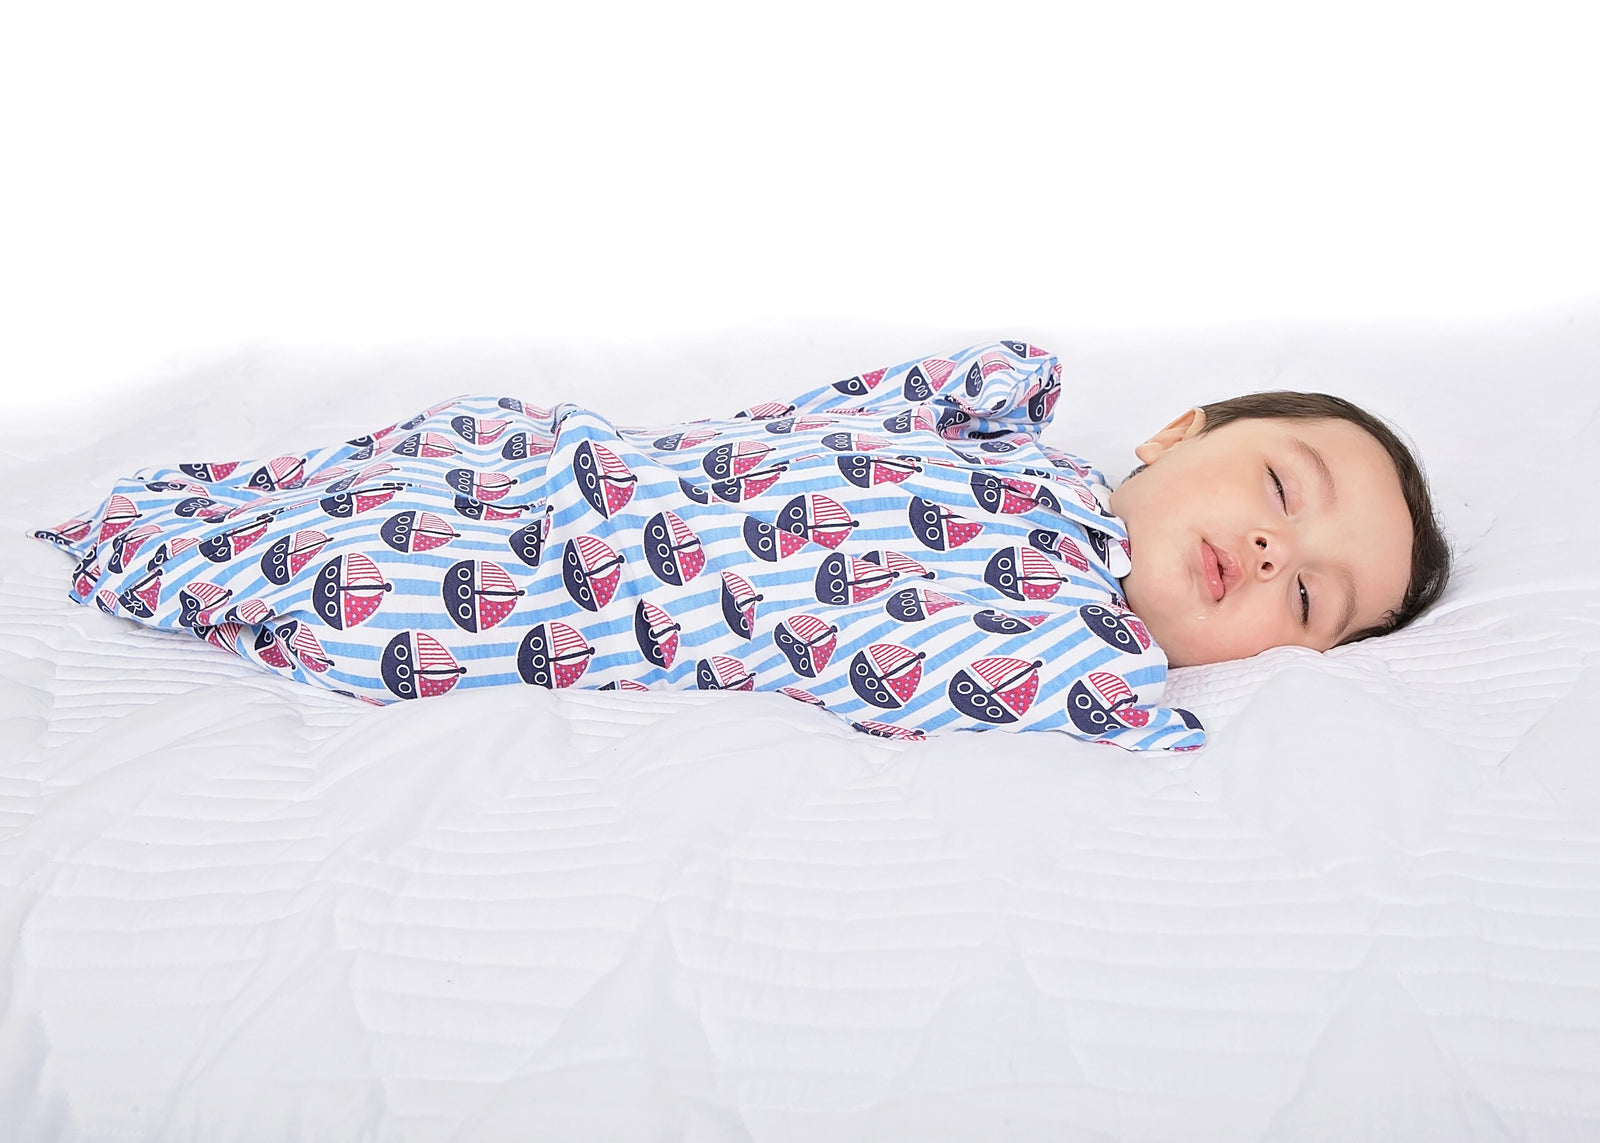 An adorable example of what a sleeping baby should wear to sleep 